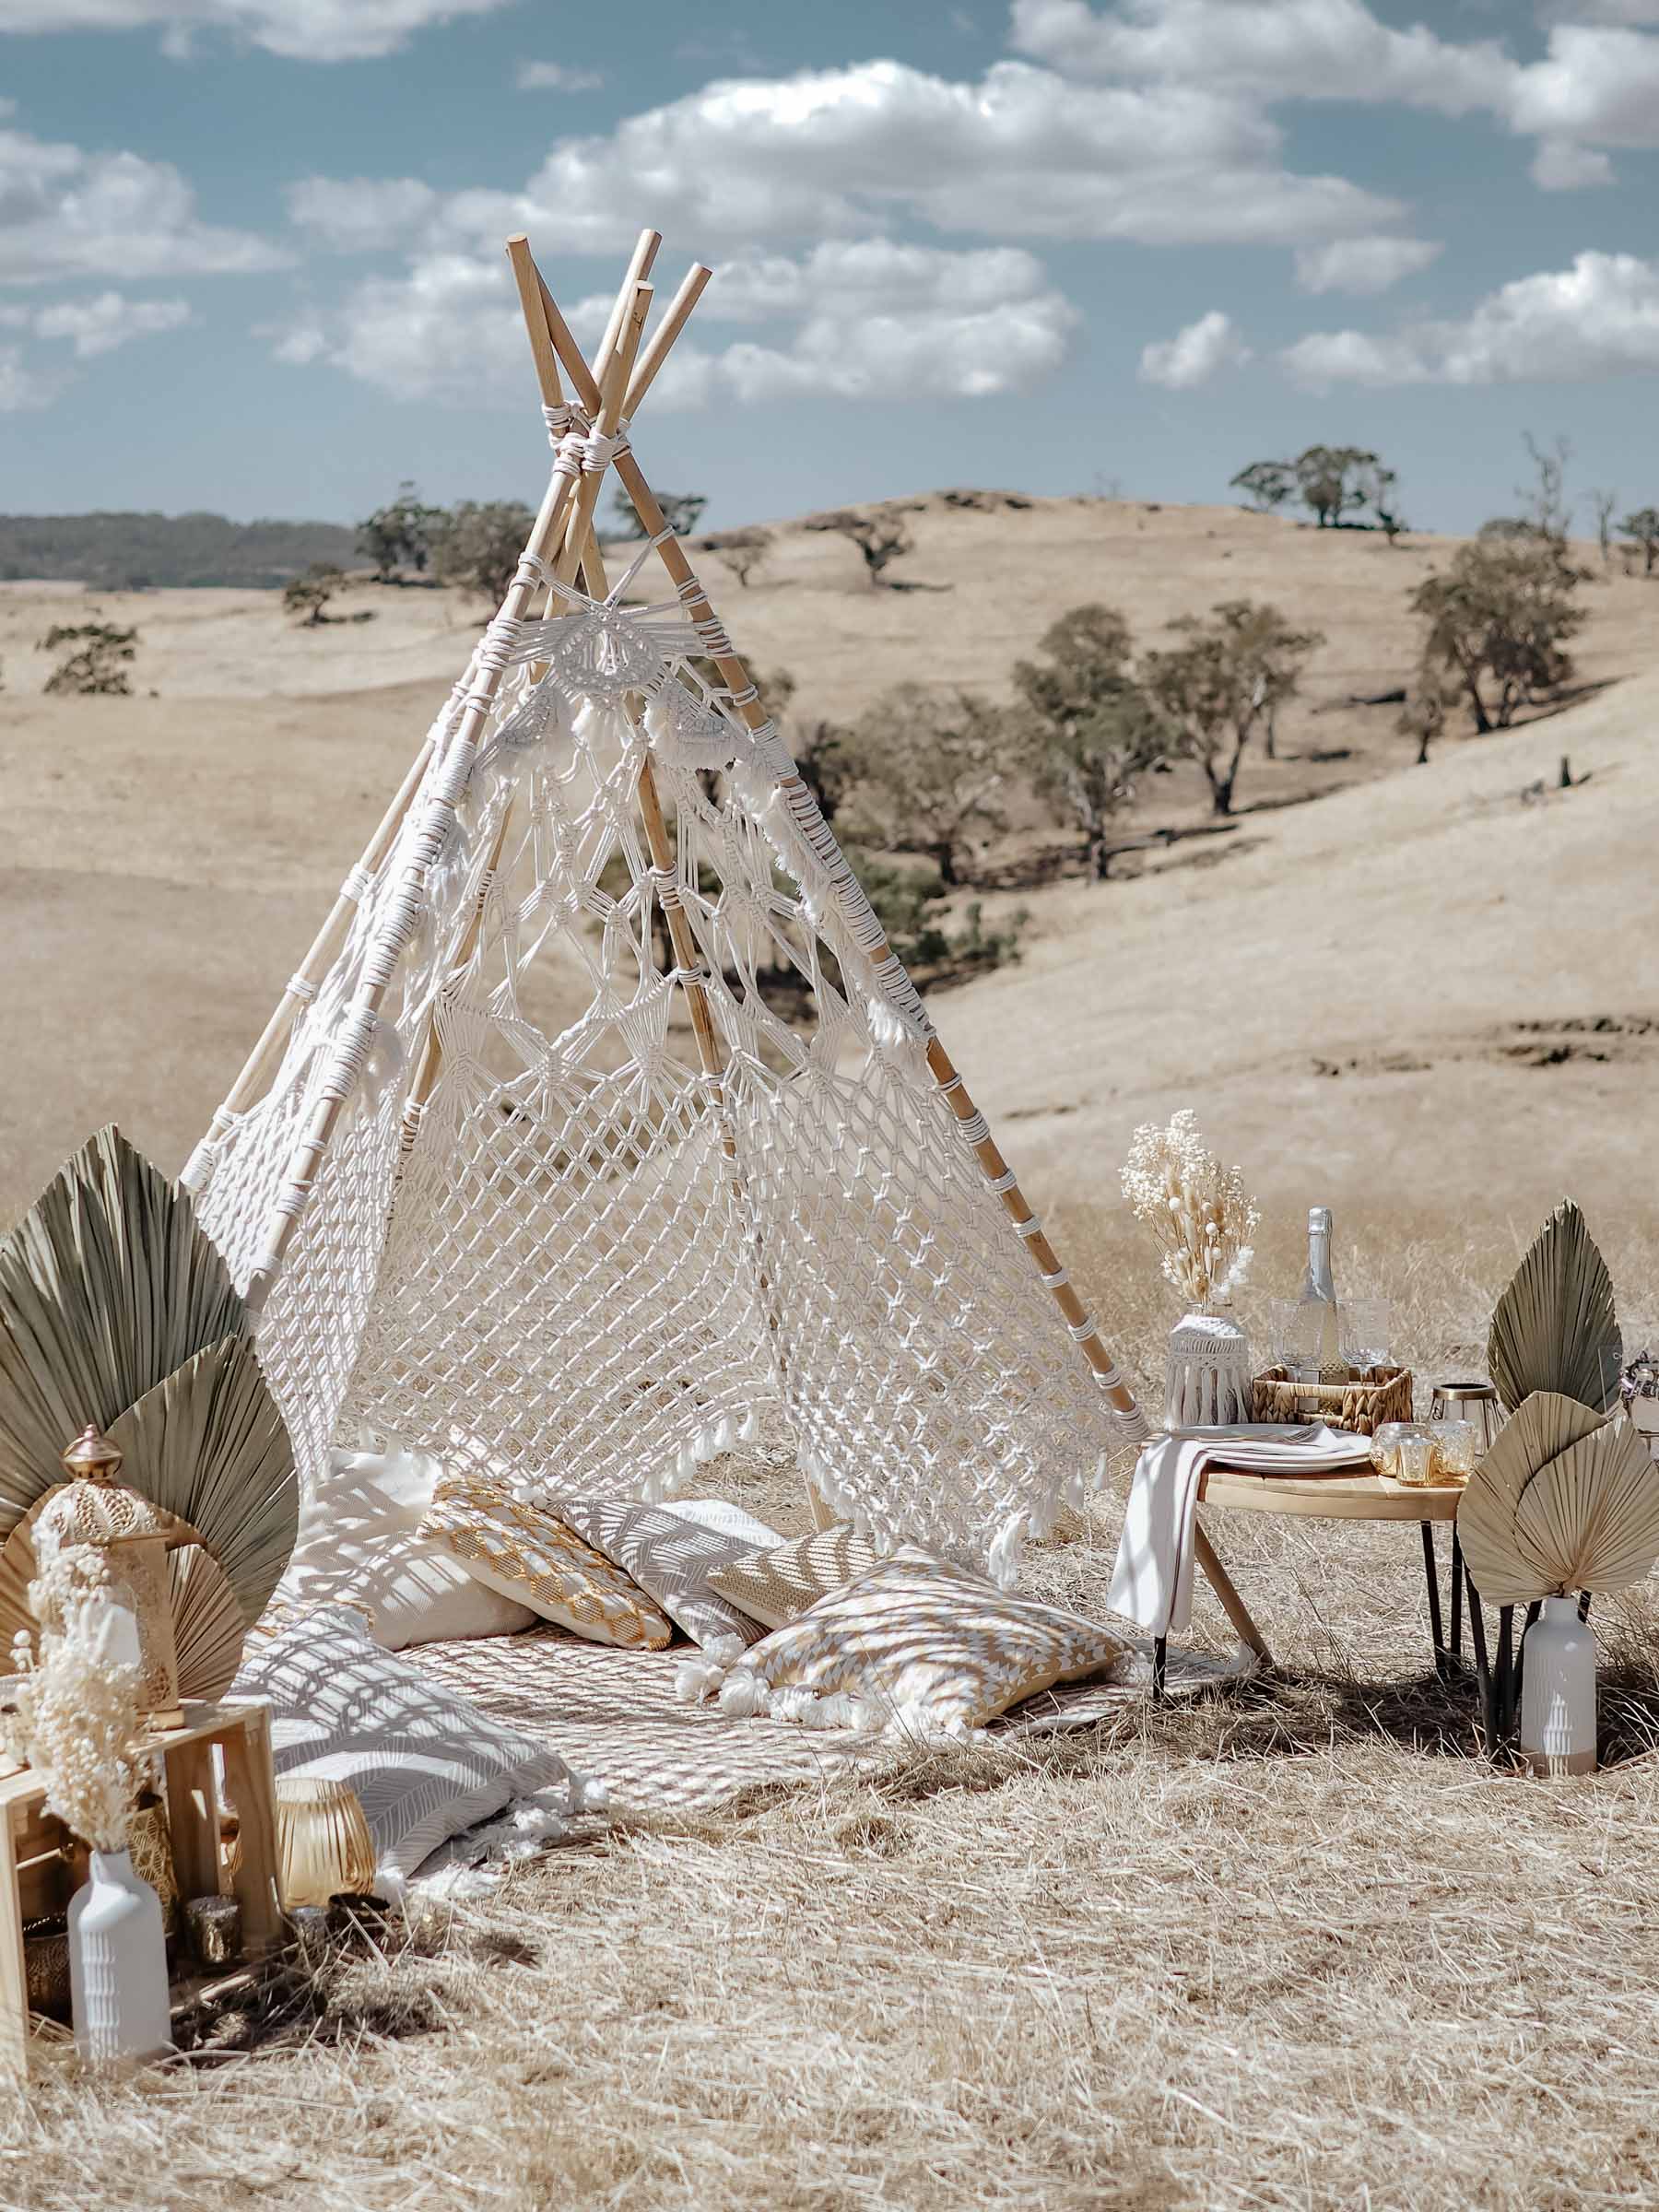 Macrame teepee picnic proposal in a field in the middle of nowhere